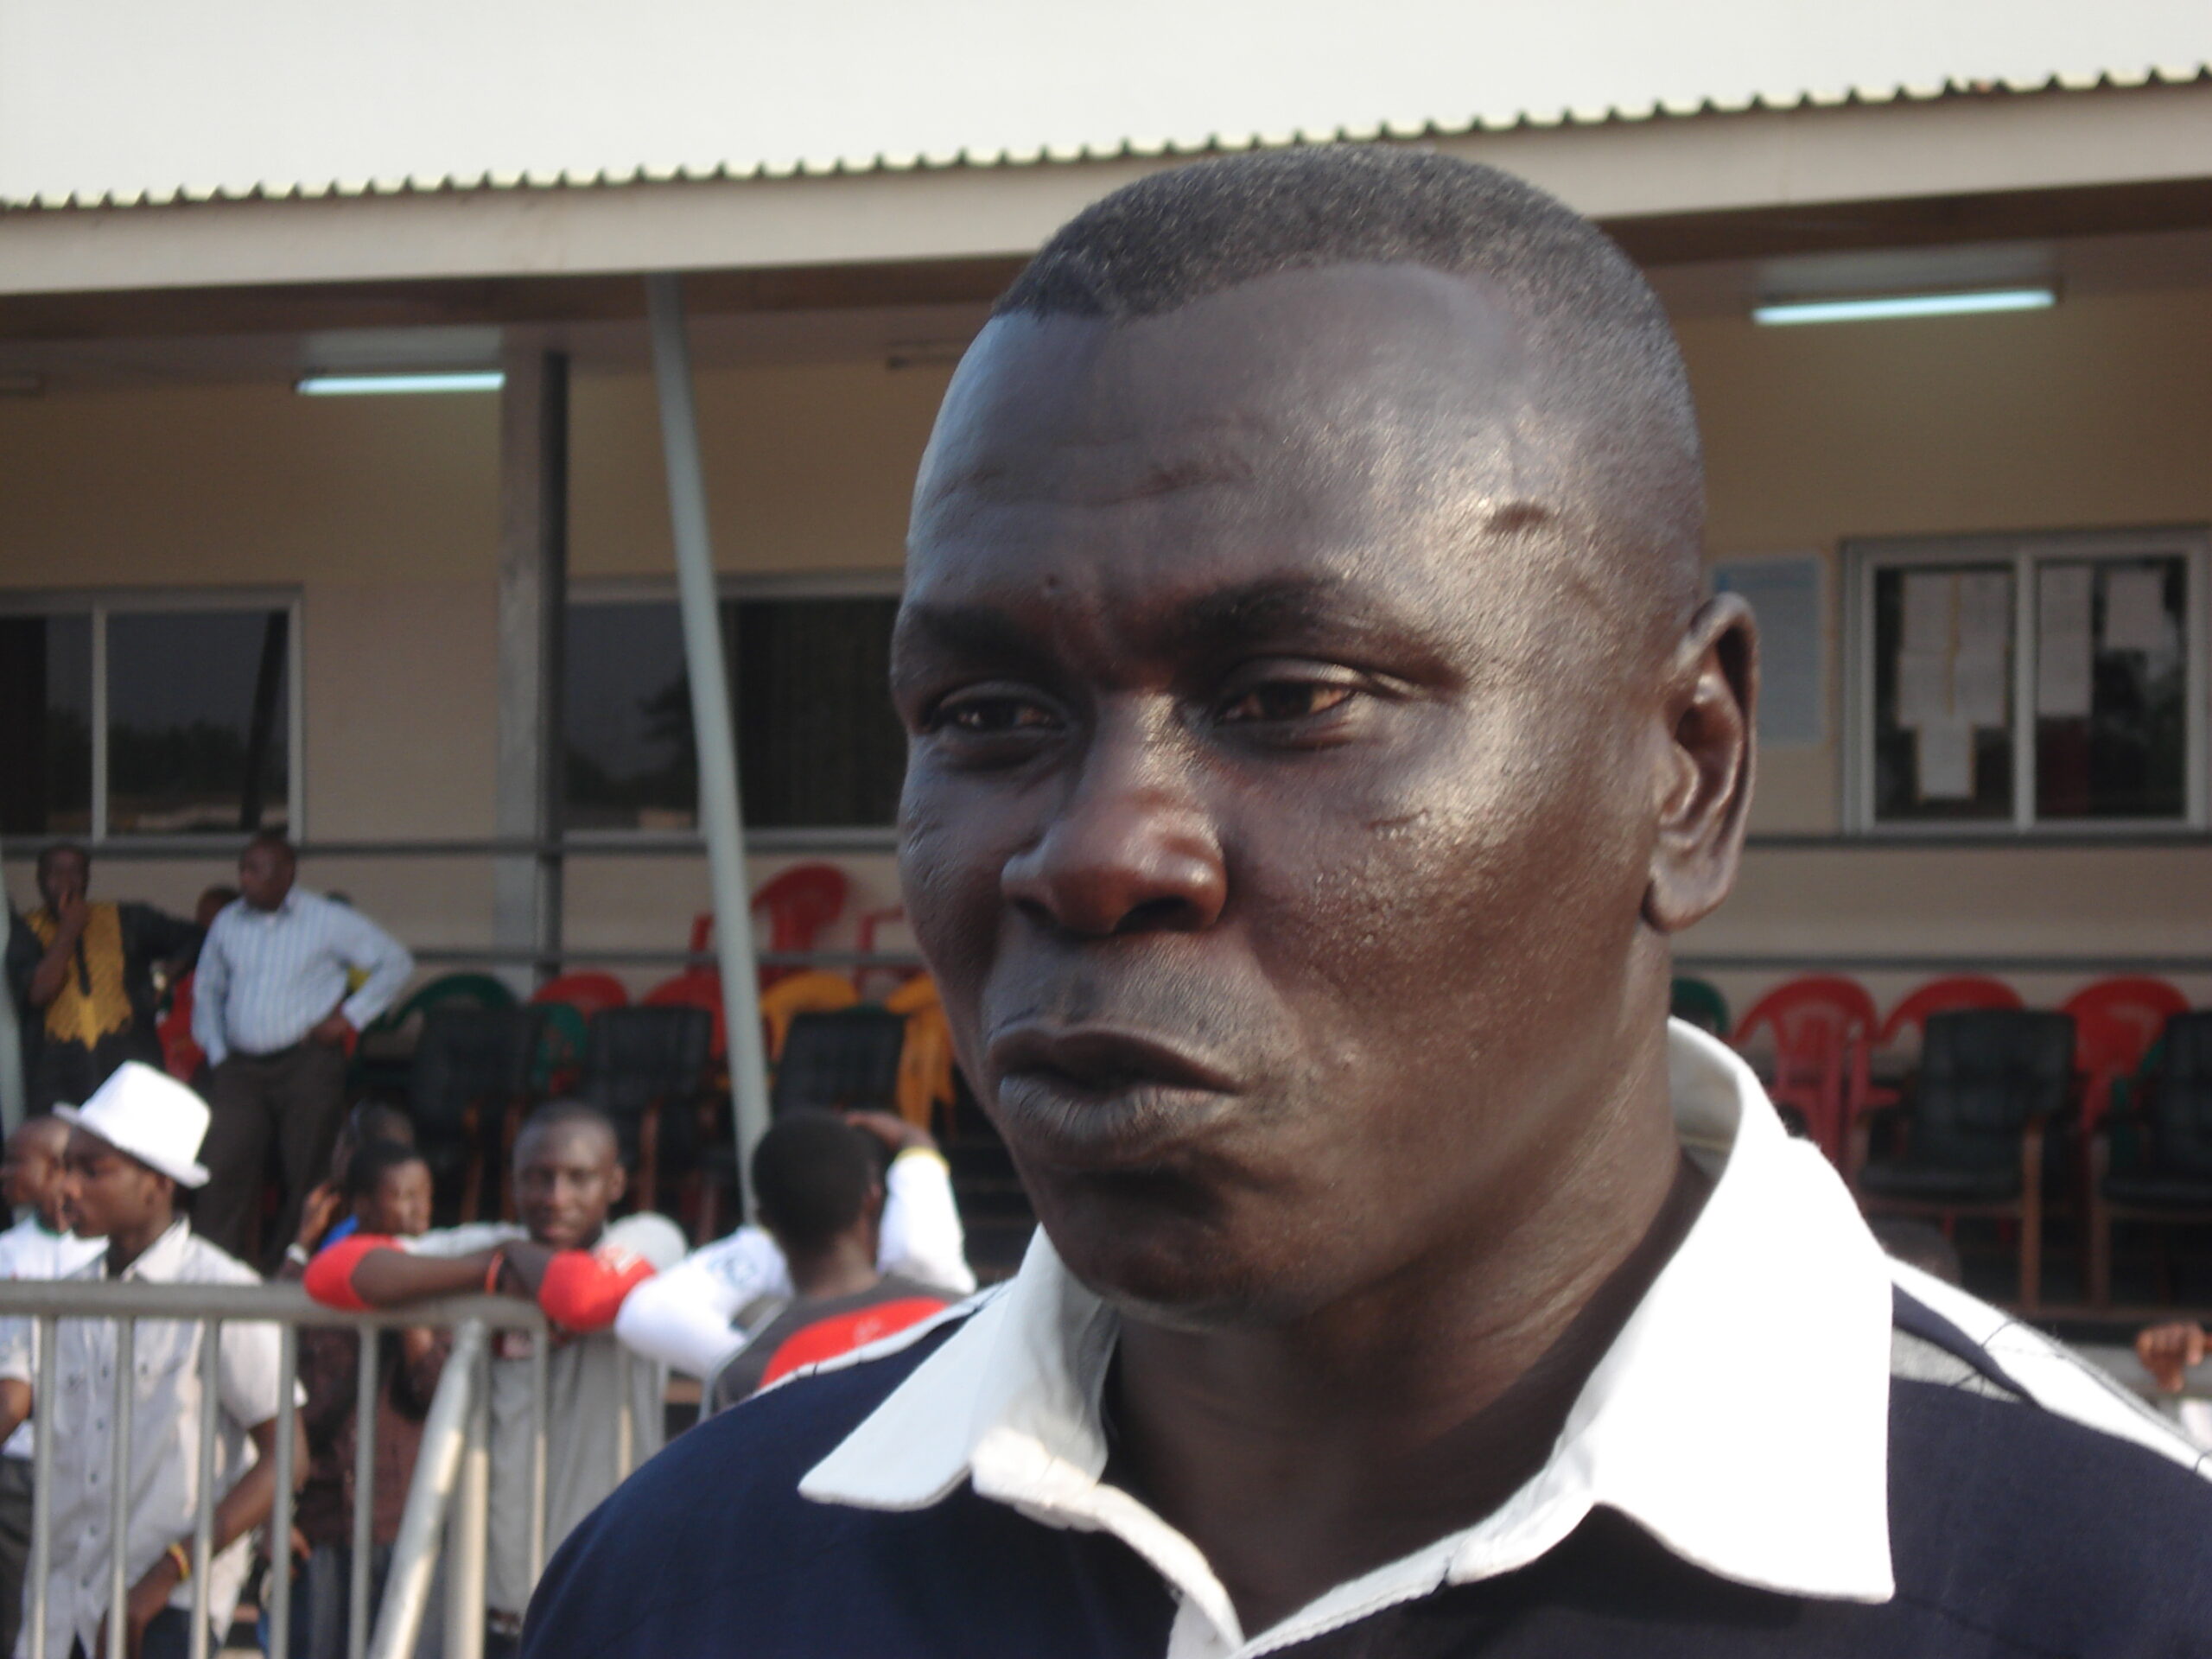 The victory against Hearts of Oak was a very good feeling - Bofoakwa Tano coach Frimpong Manso